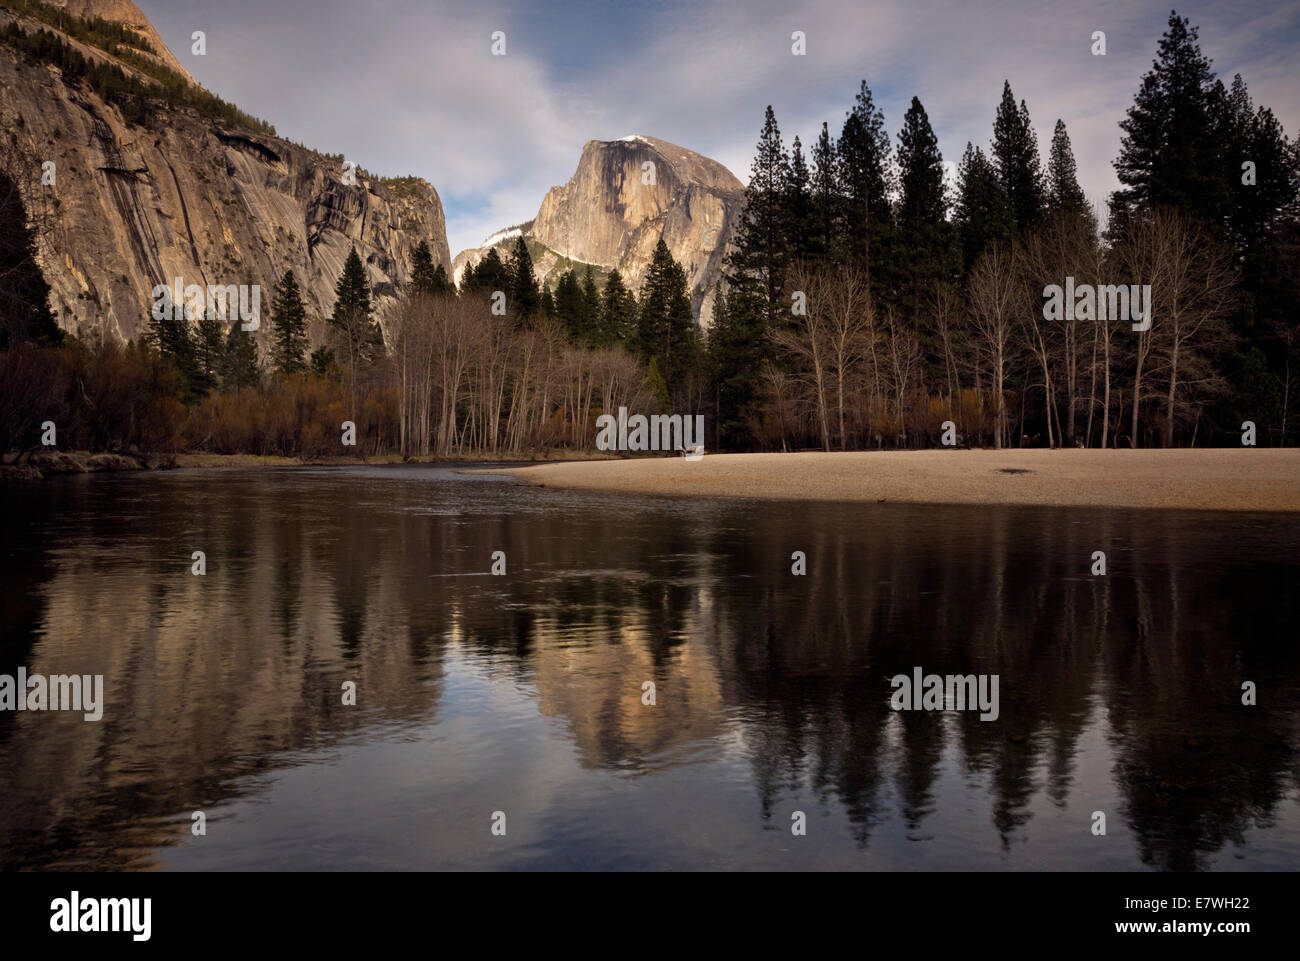 CA02328-00...CALIFORNIA - Half Dome reflecting at sunset in the Merced River in Yosemite National Park. Stock Photo